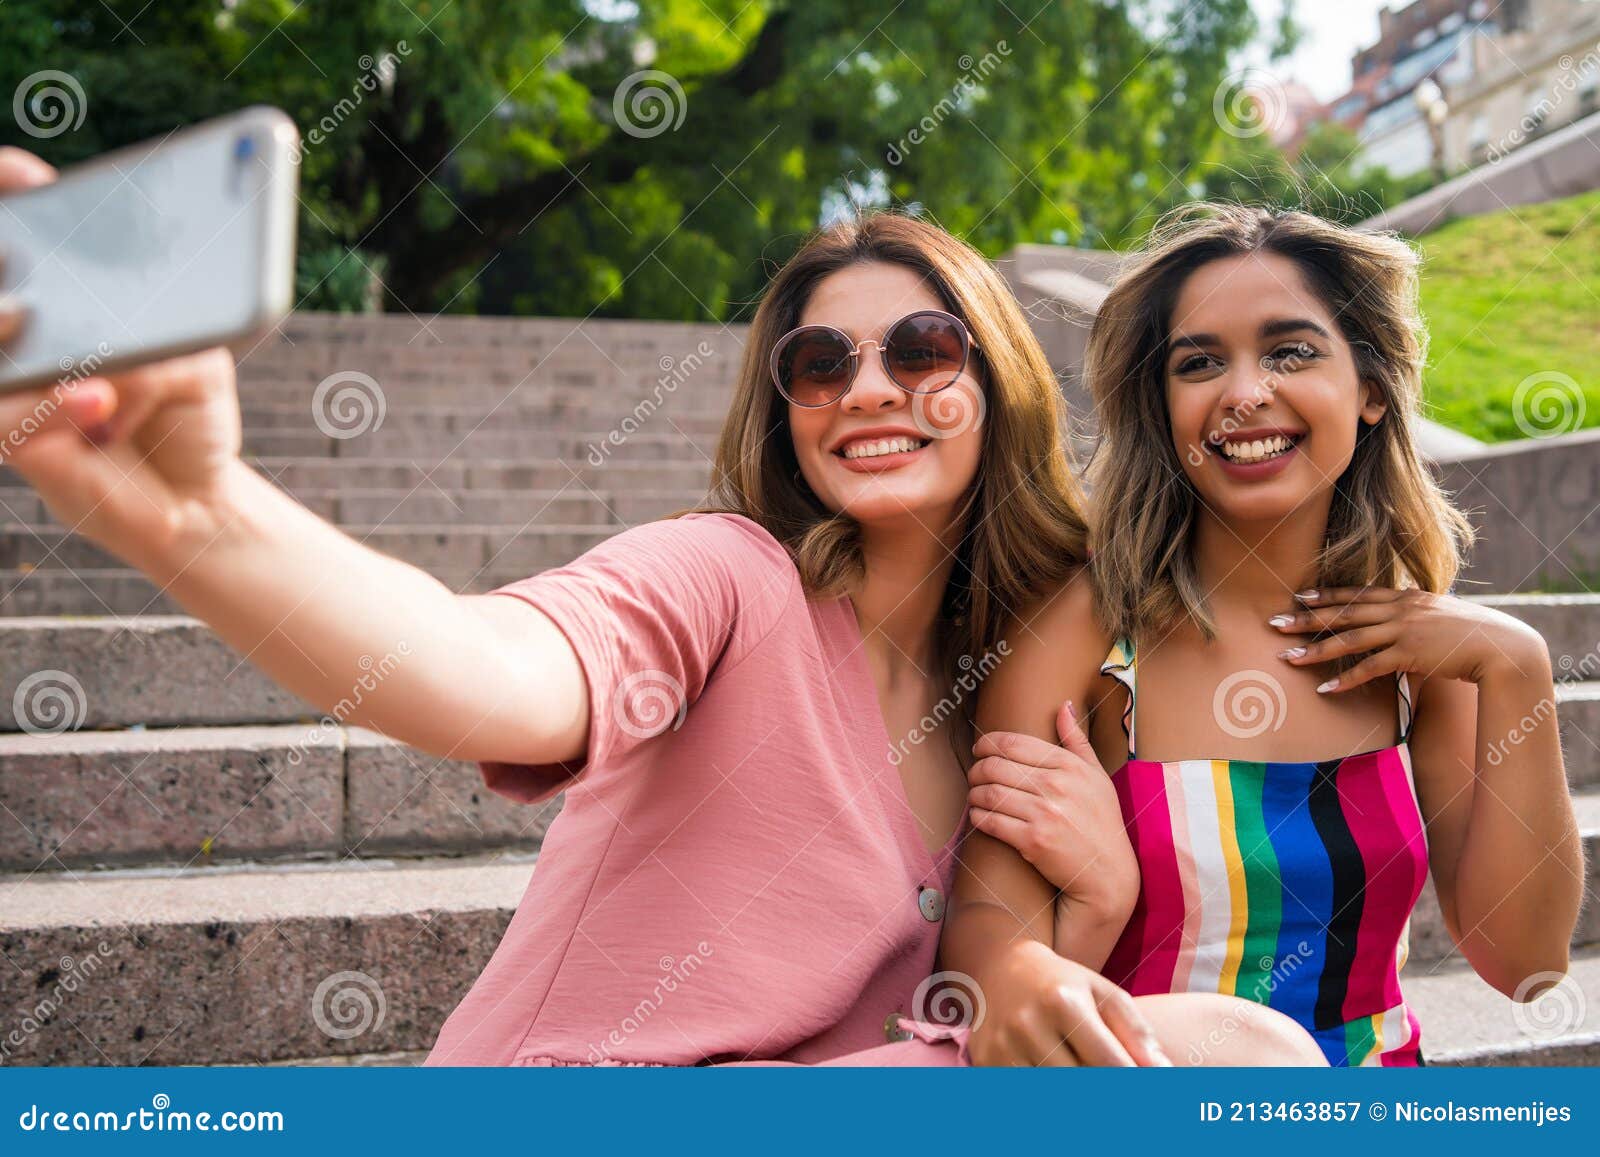 Two Friends Taking Selfie with Phone Outdoors. Stock Image - Image of ...